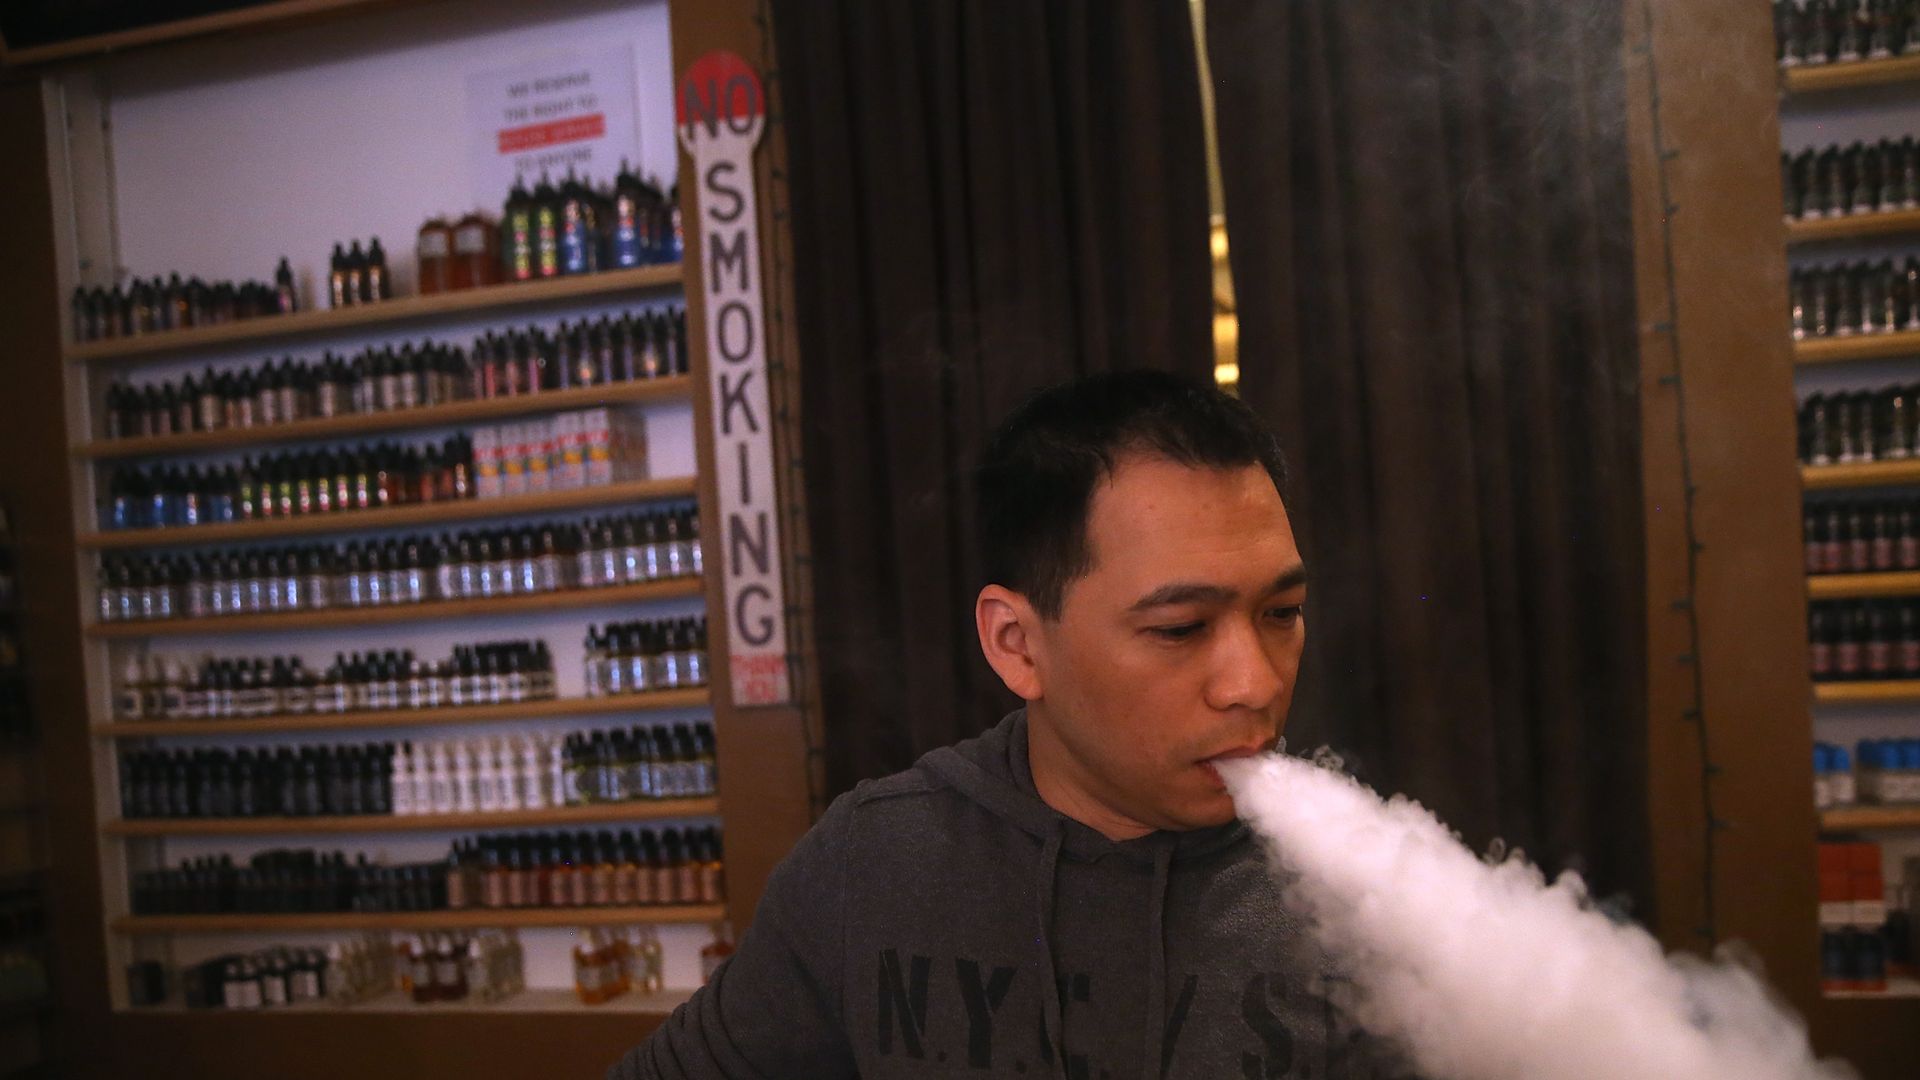 In this image, a man blows a cloud of white smoke down and behind him a shelf of vaping products says "no smoking."